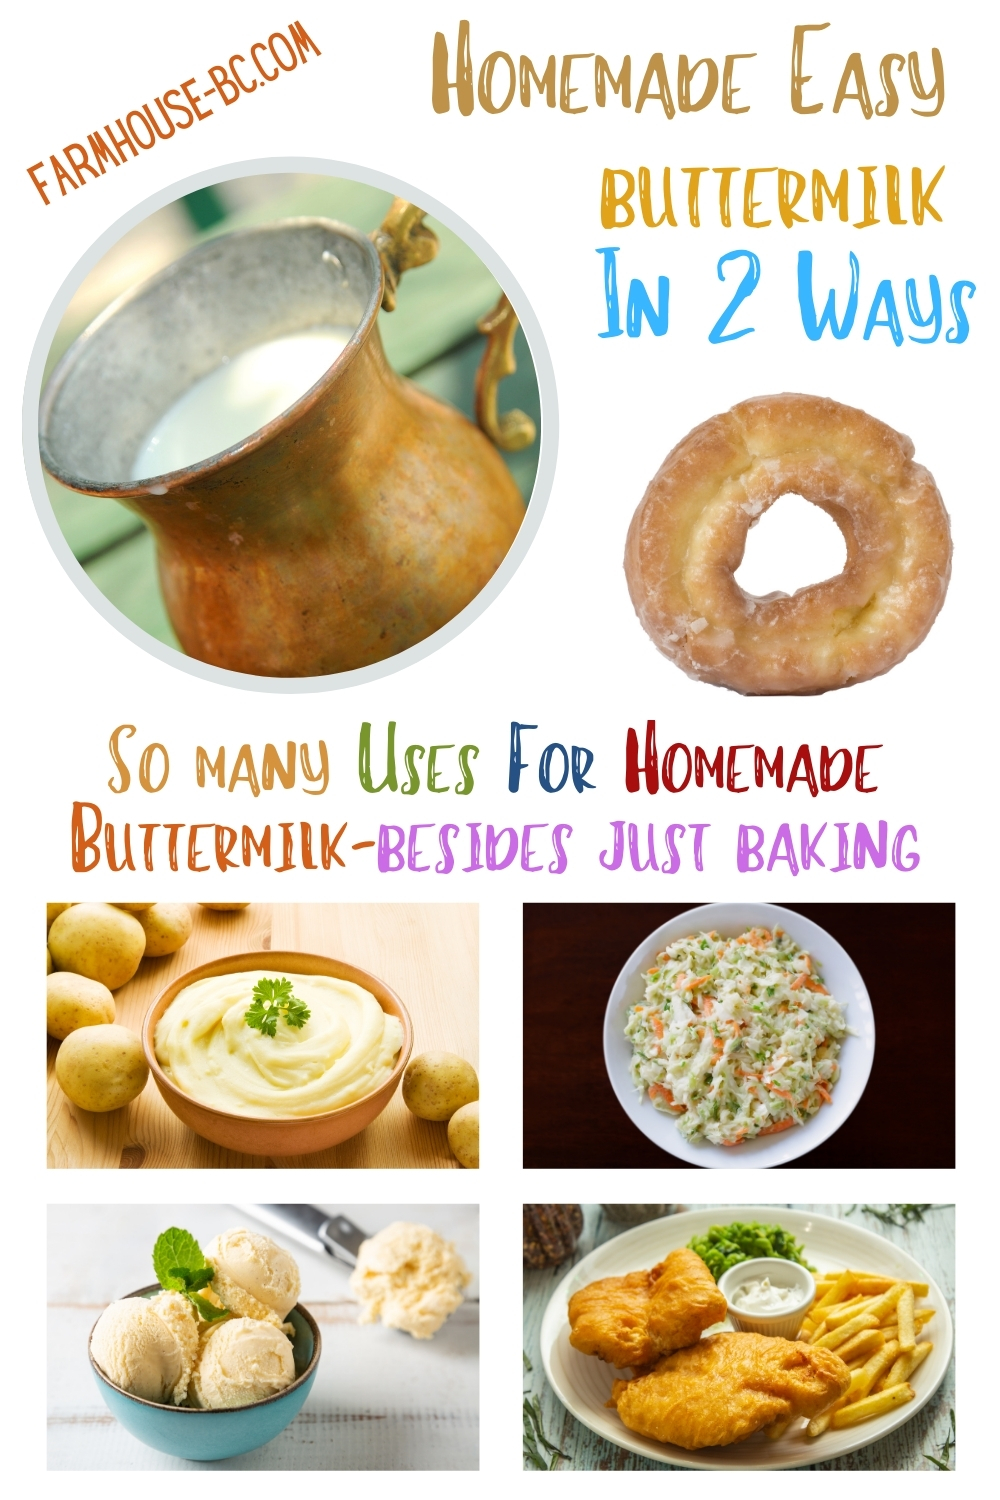 Homemade buttermilk in 2 ways with so many uses!